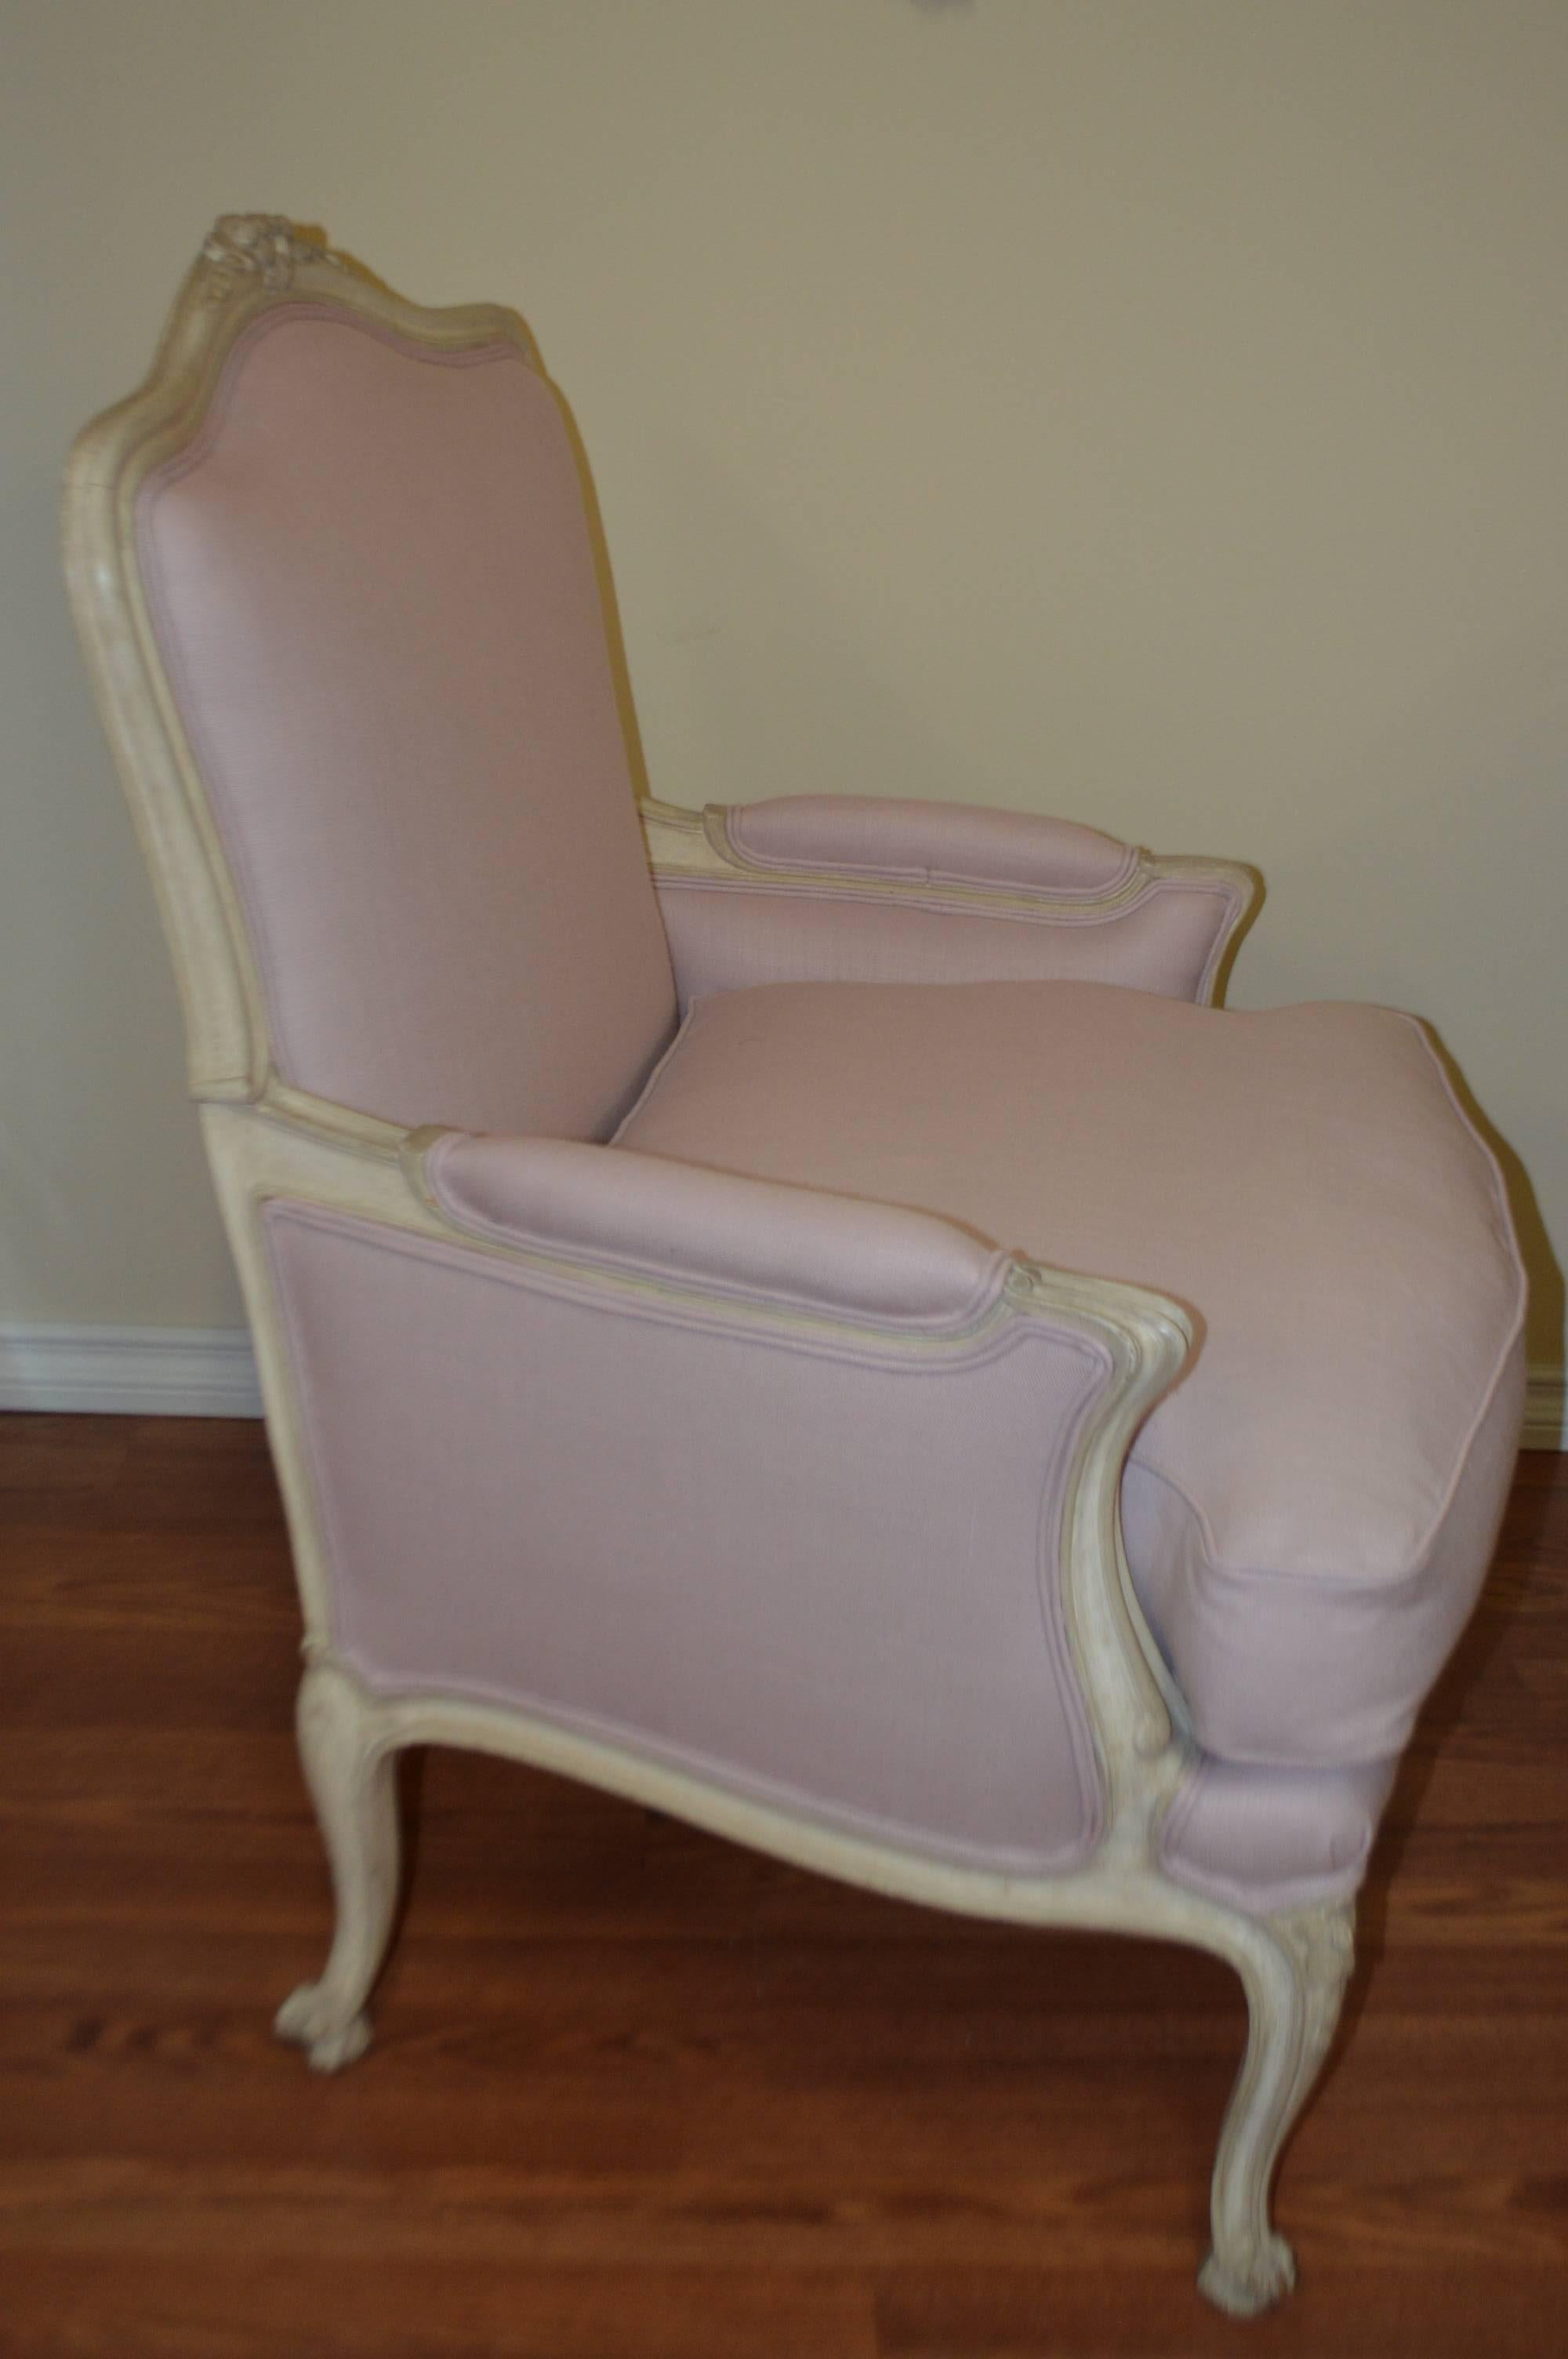 Louis XV style painted bergere chair, generous size, very comfy with feather and dawn seat cushion. The frame has the original patina and it has been newly upholstered with a lavender tone linen.